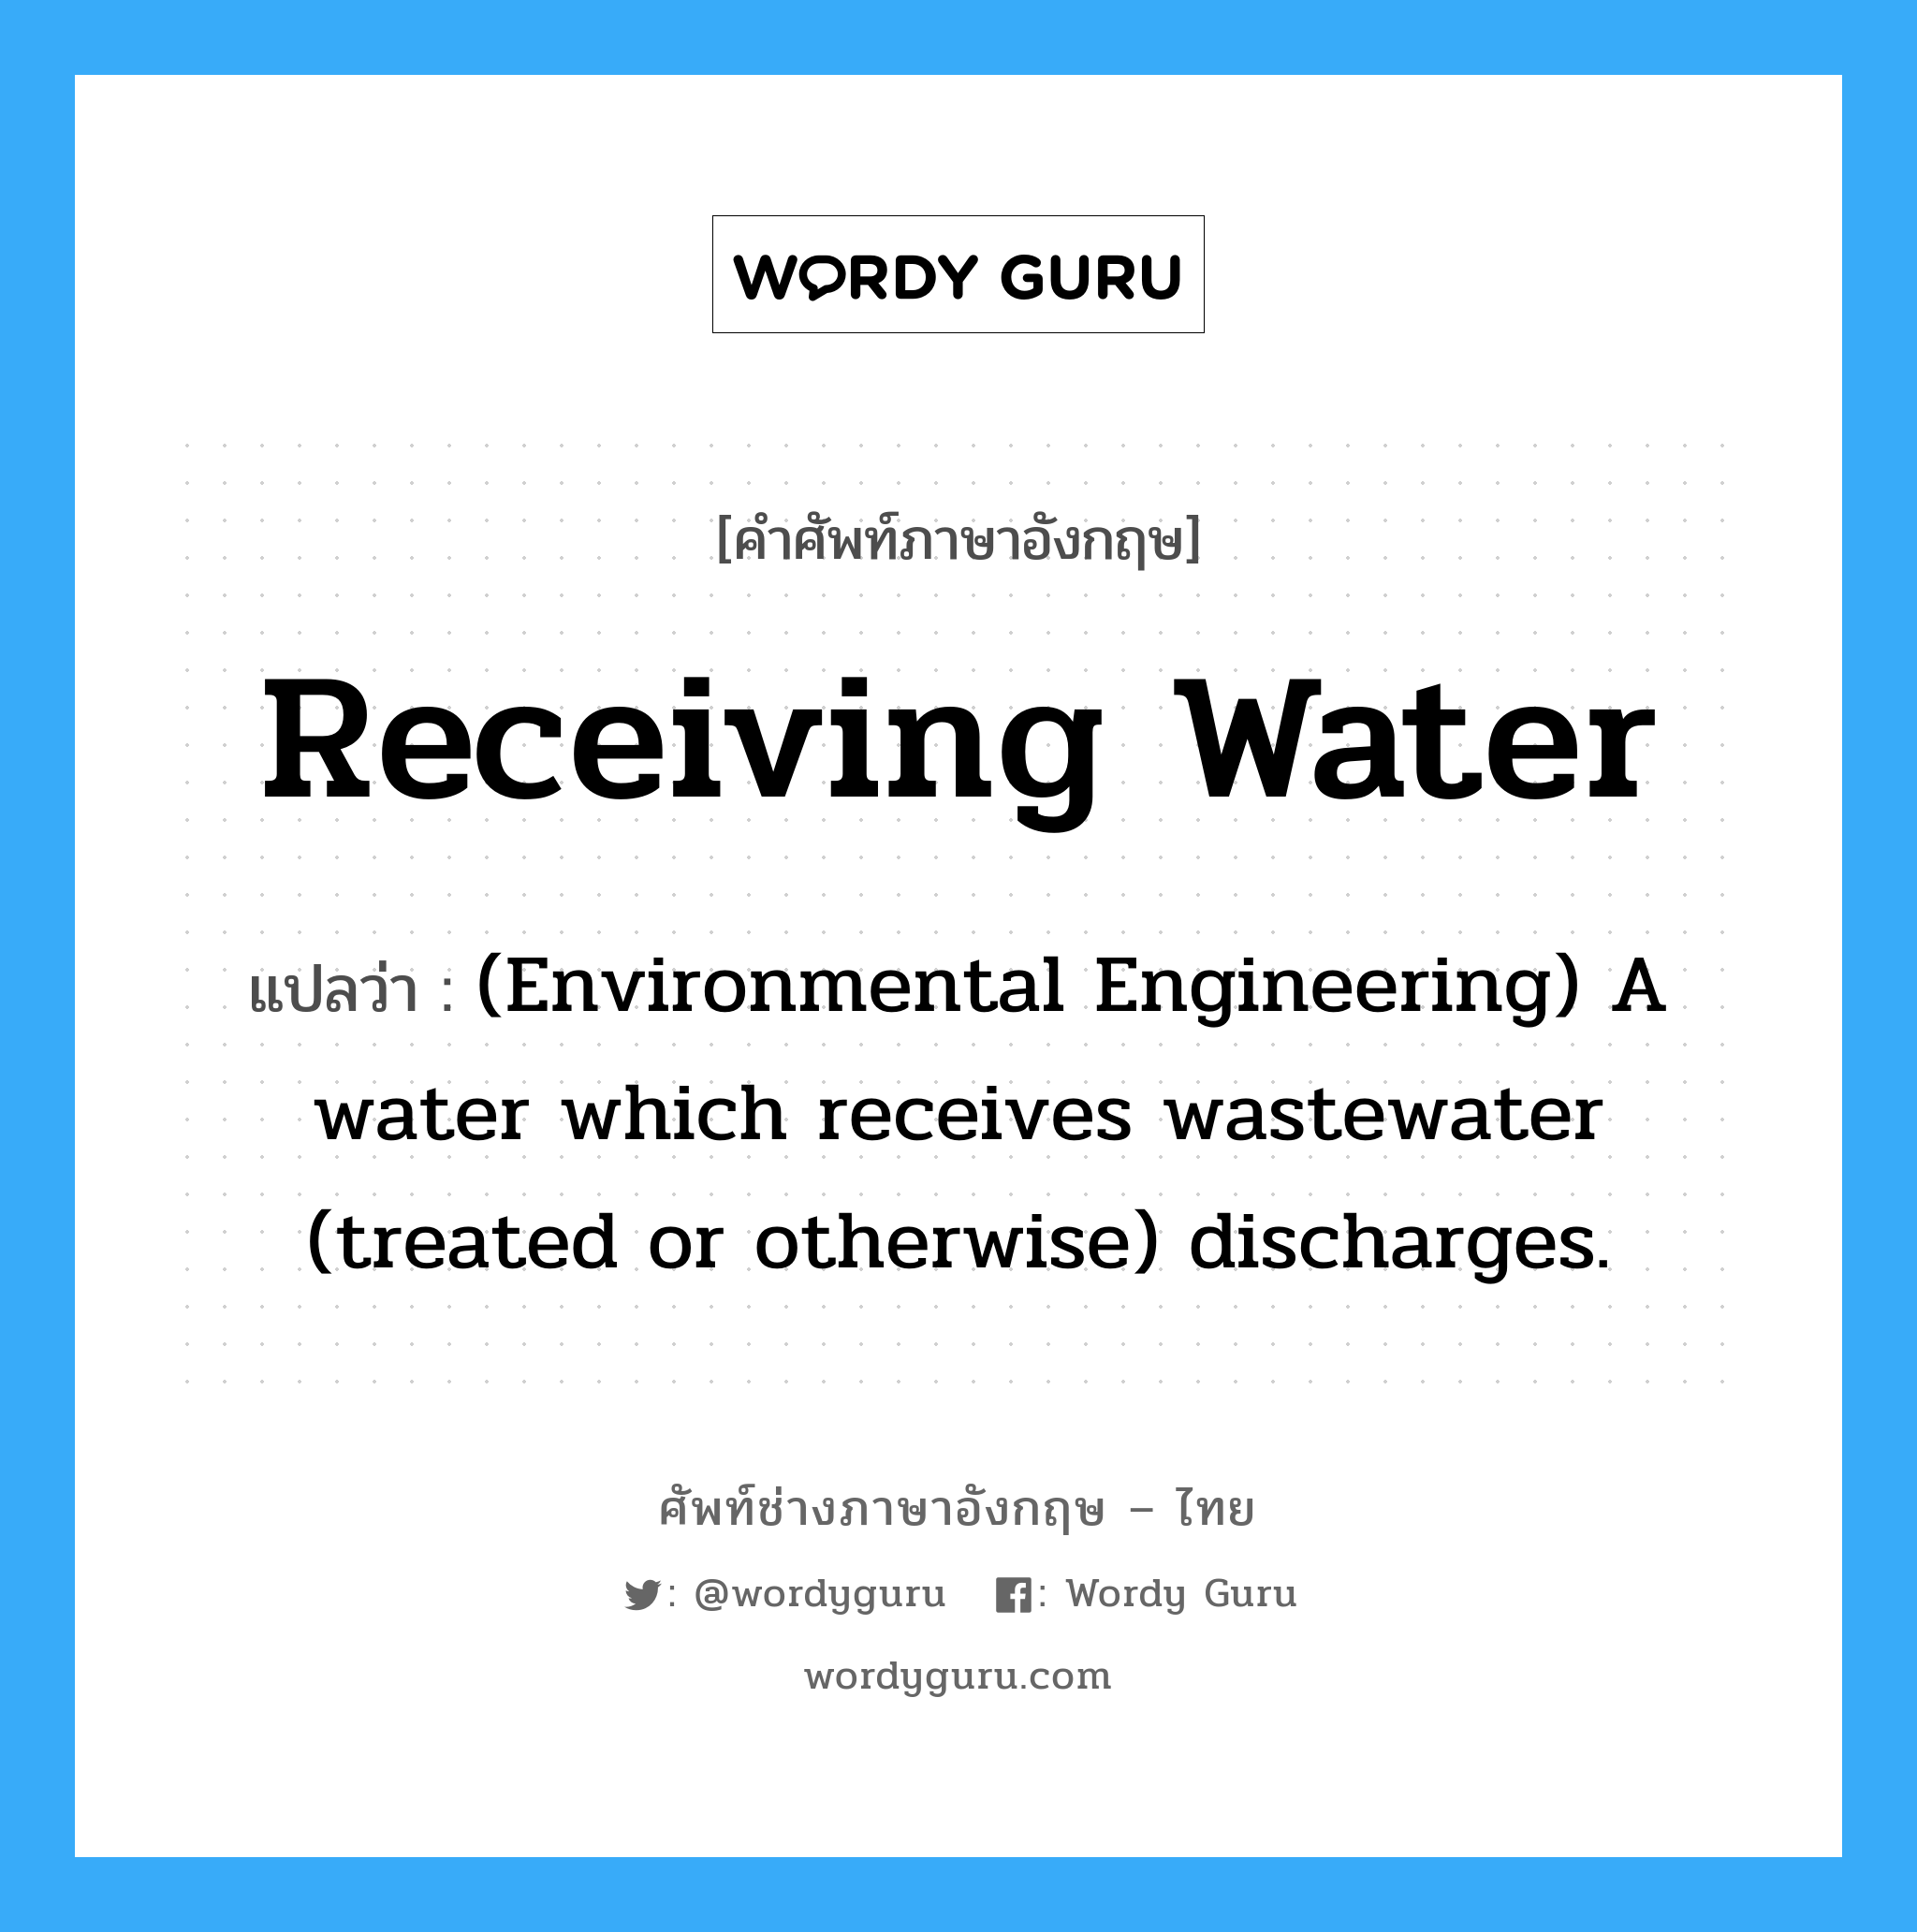 Receiving water แปลว่า?, คำศัพท์ช่างภาษาอังกฤษ - ไทย Receiving water คำศัพท์ภาษาอังกฤษ Receiving water แปลว่า (Environmental Engineering) A water which receives wastewater (treated or otherwise) discharges.